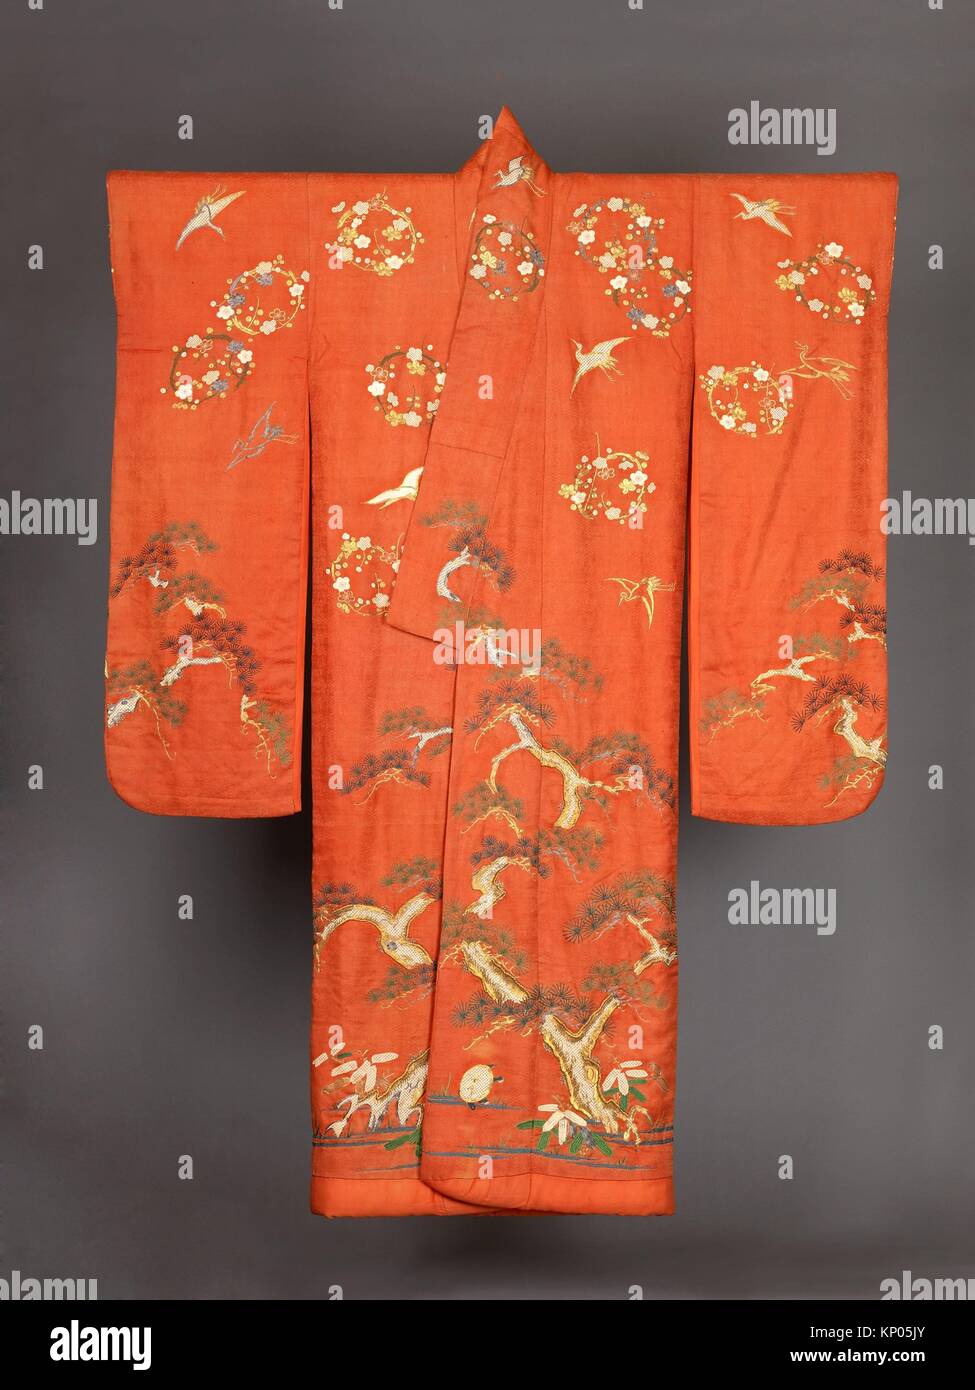 Furisode. Date: 19th century; Culture: Japanese; Medium: Possibly beni-dyed light red (orange) silk, figured satin weave, embroidered and couched in Stock Photo